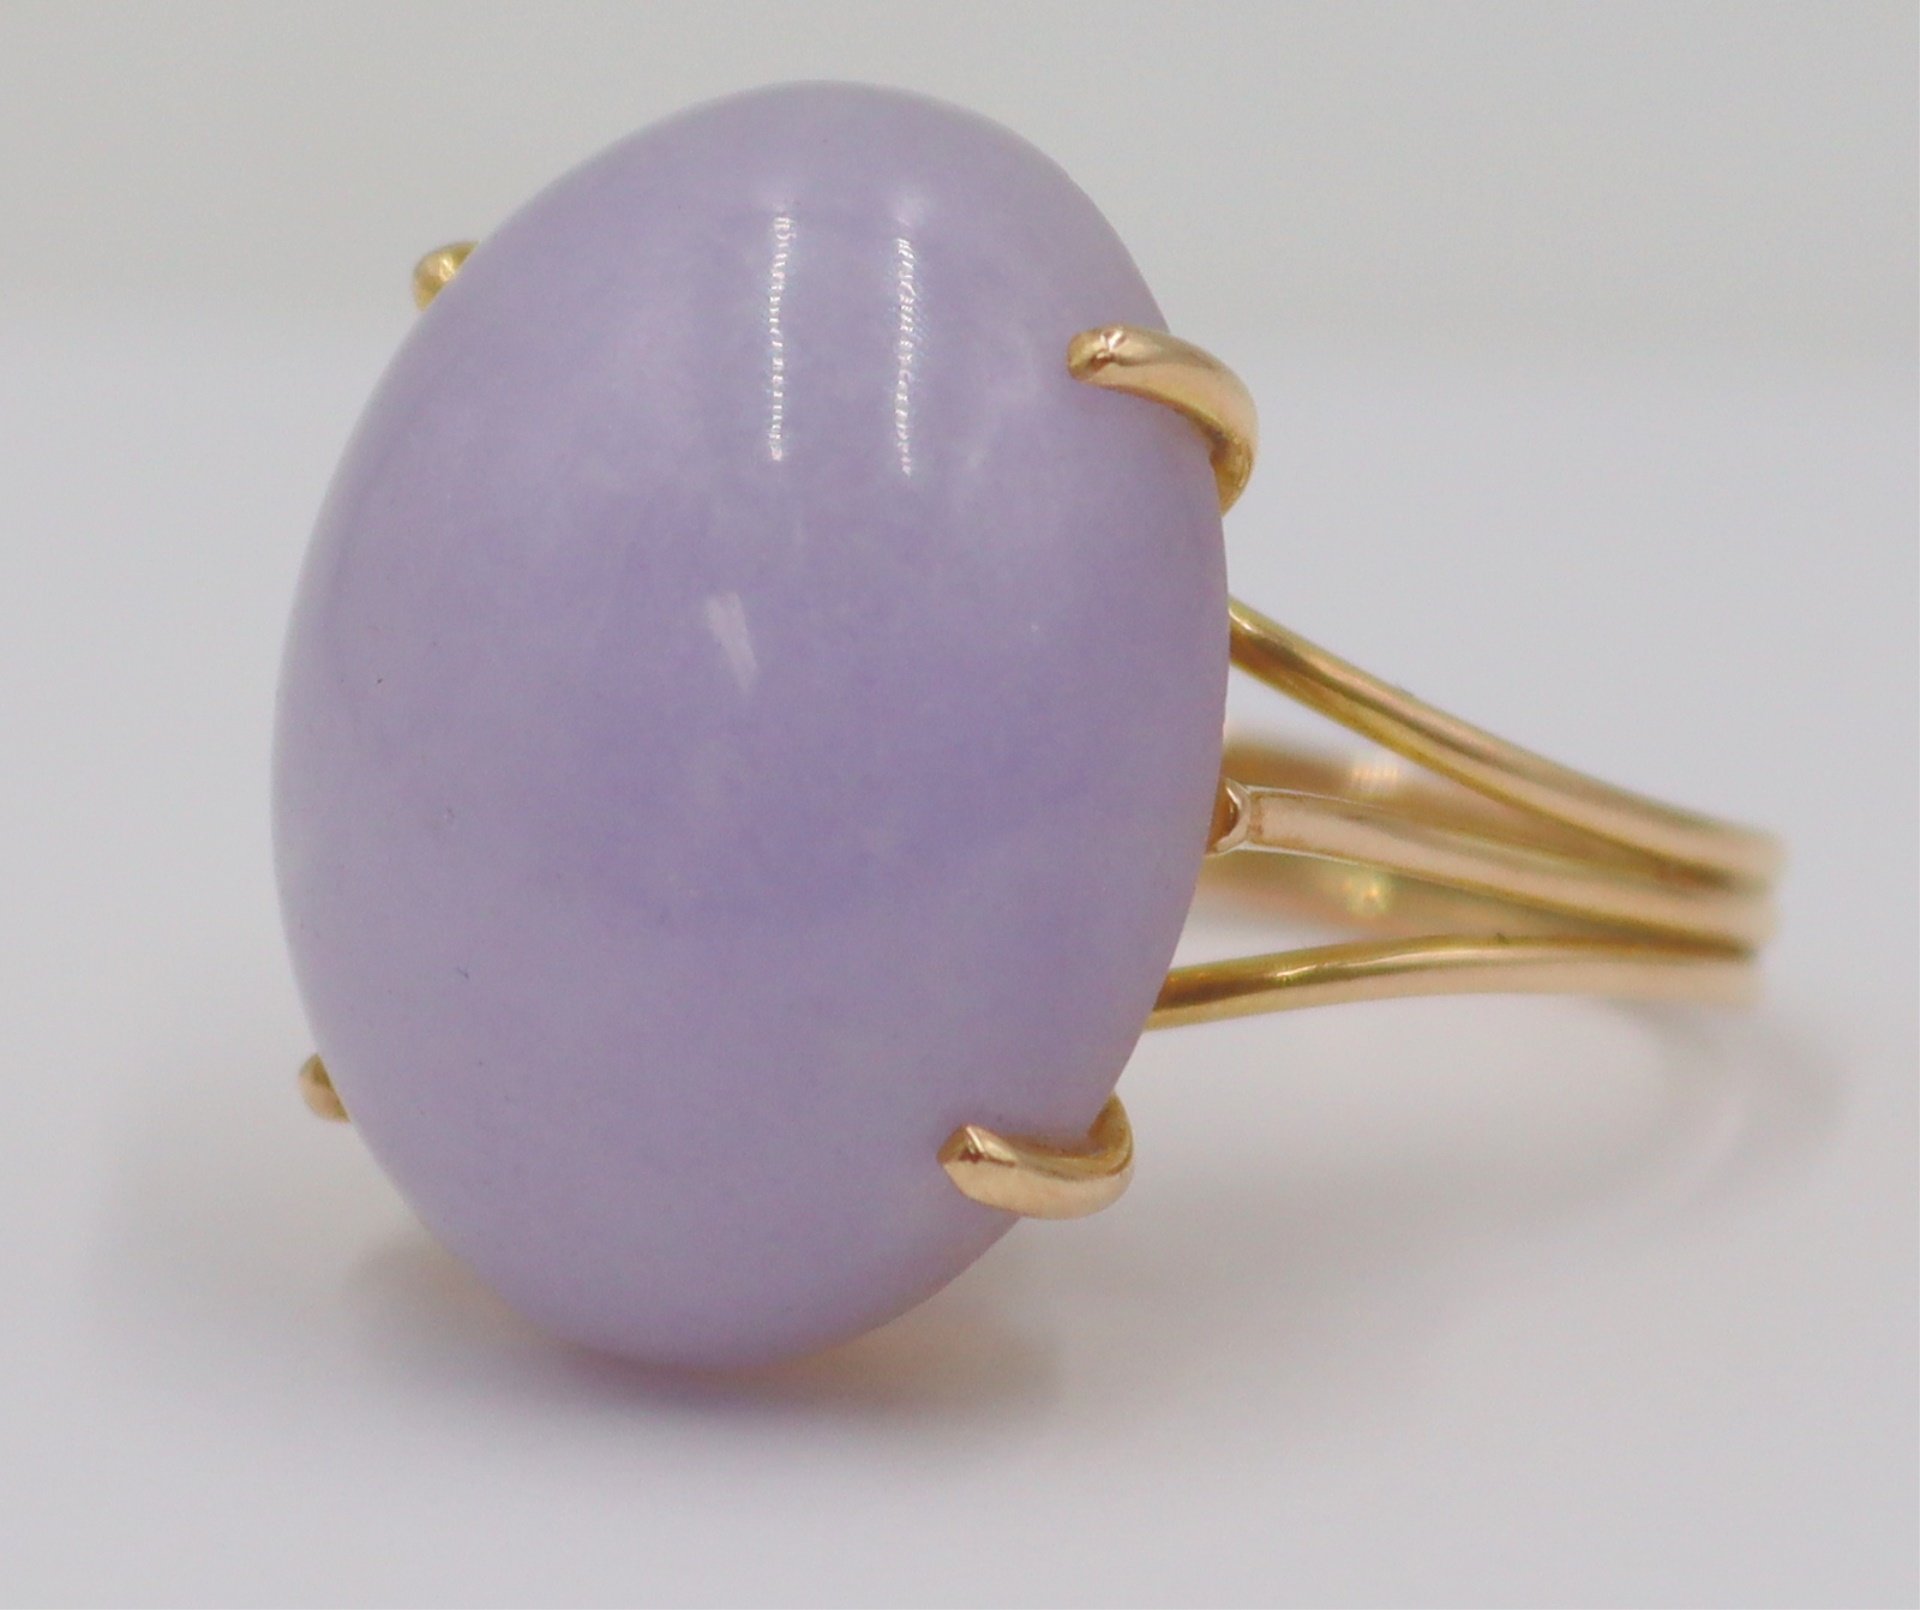 JEWELRY 14KT GOLD AND LAVENDER 3bacab